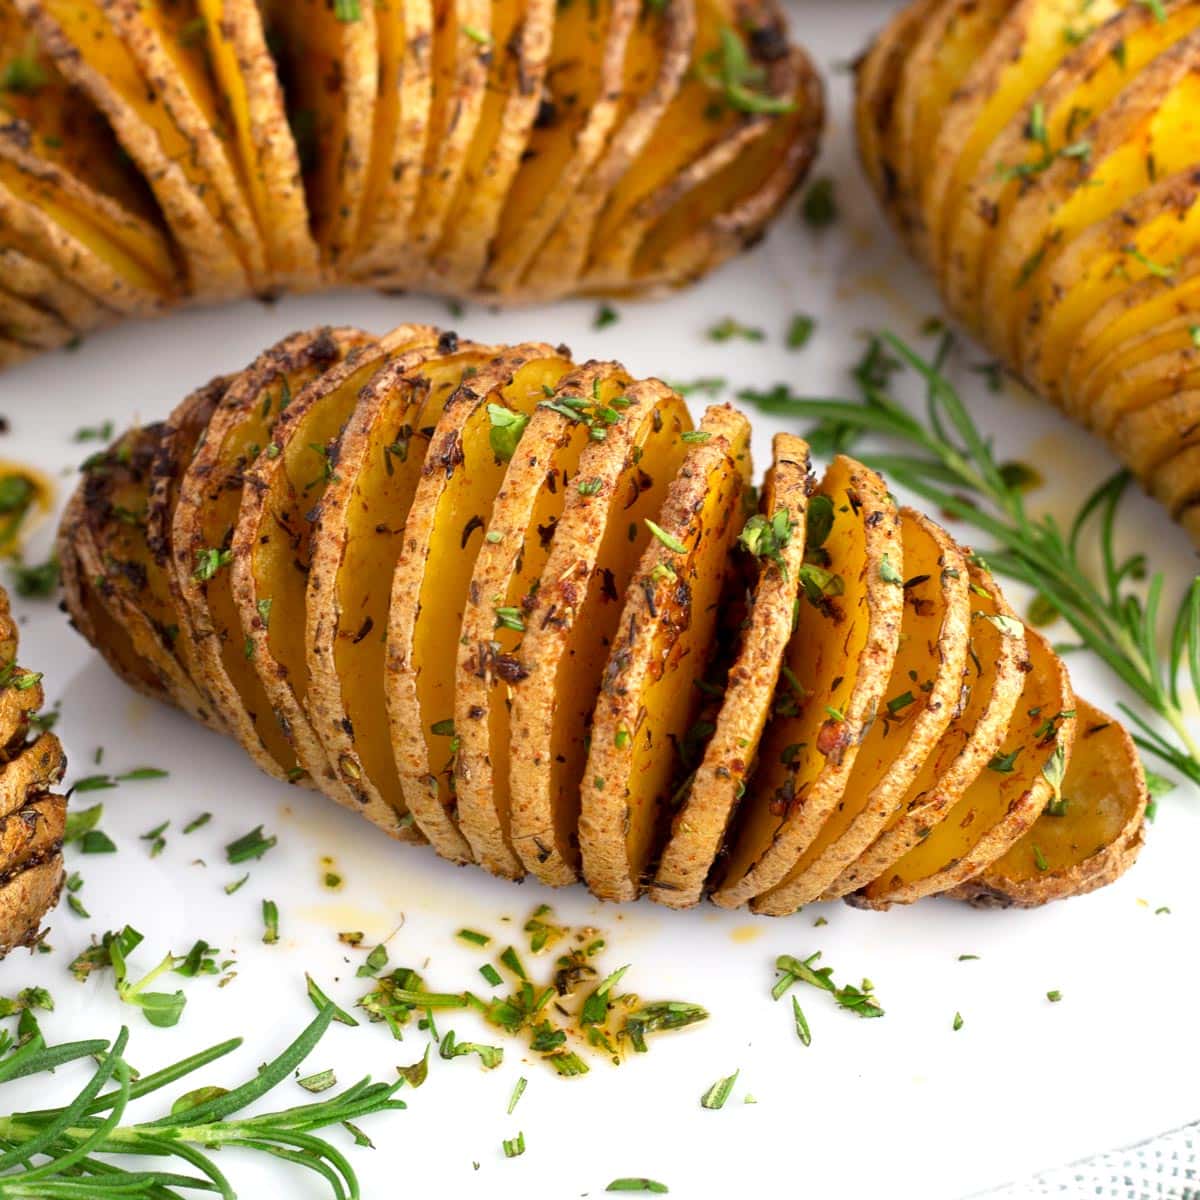 Have you seen this amazing tool for Hasselback potatoes?